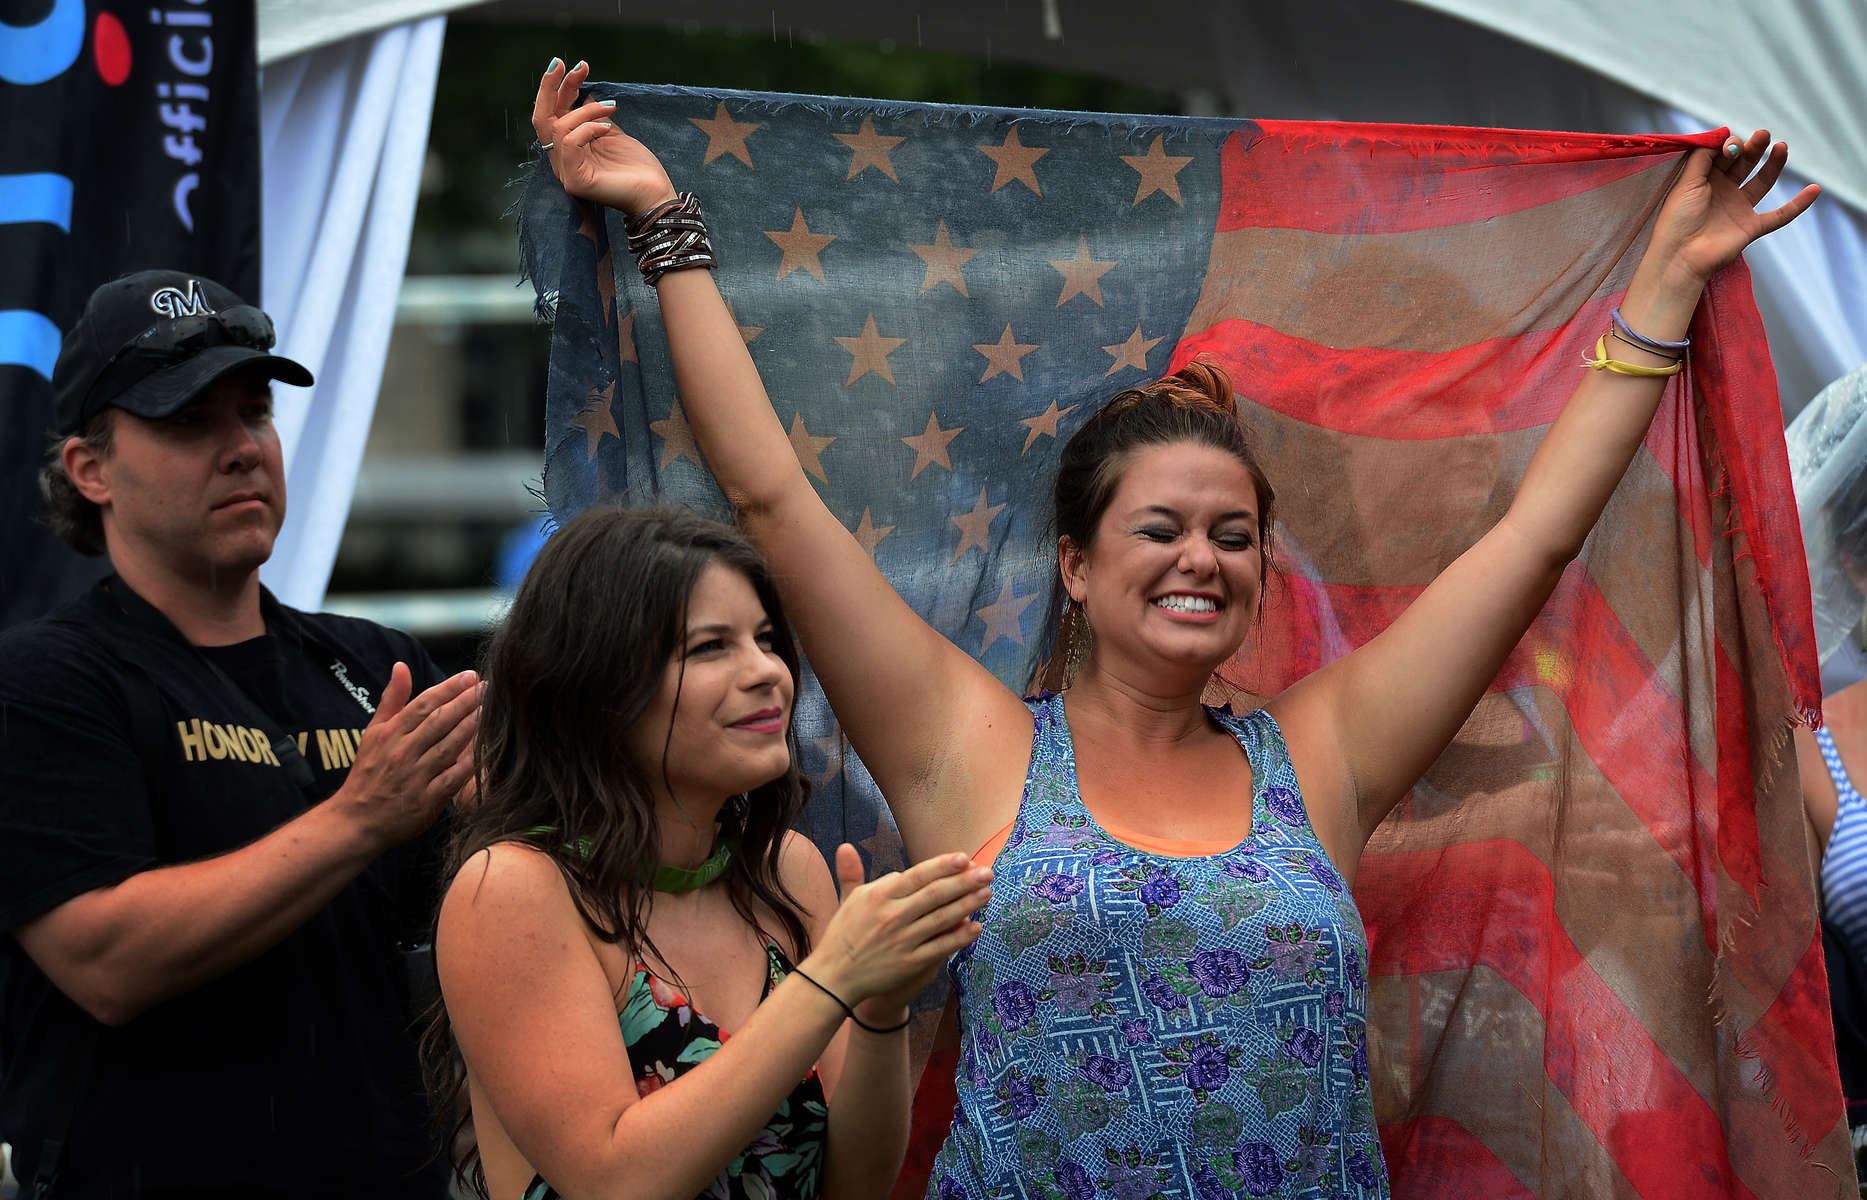 Kada Unwin, center, and Elizabeth Dowgin celebrate while listening to Danielle Peck perform at Transitions Performance Park during the 2013 CMA Music Festival in Nashville, Tenn. (The Tennessean/ Mark Zaleski)